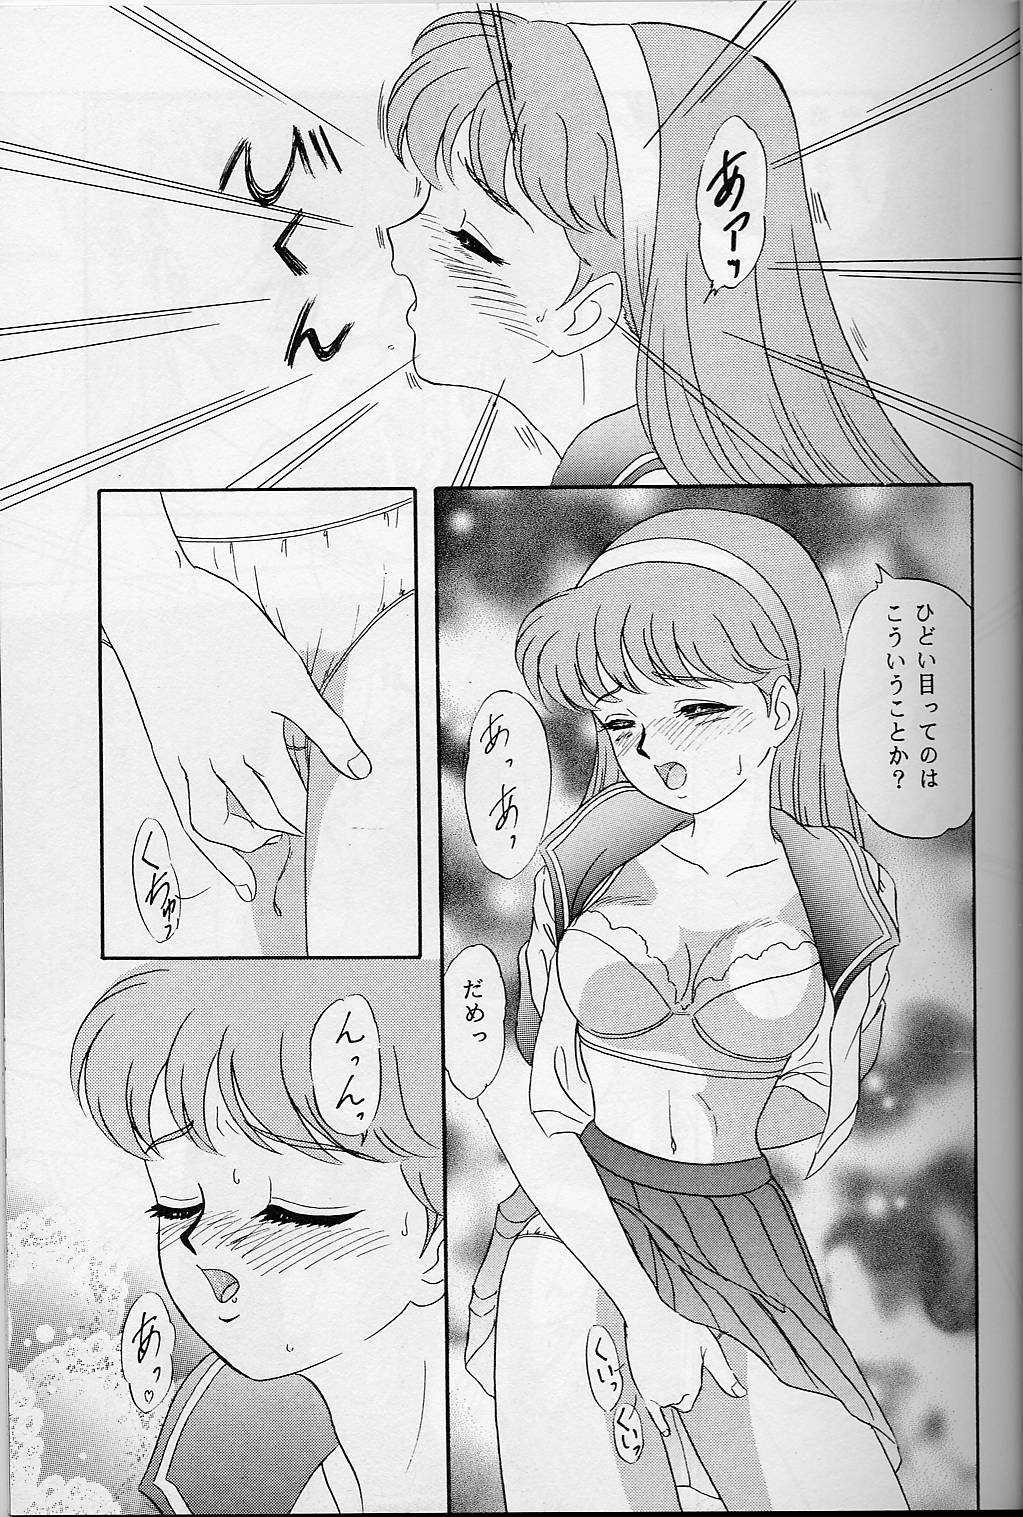 Ejaculations Lunch Time 5 - Tokimeki memorial Bdsm - Page 8